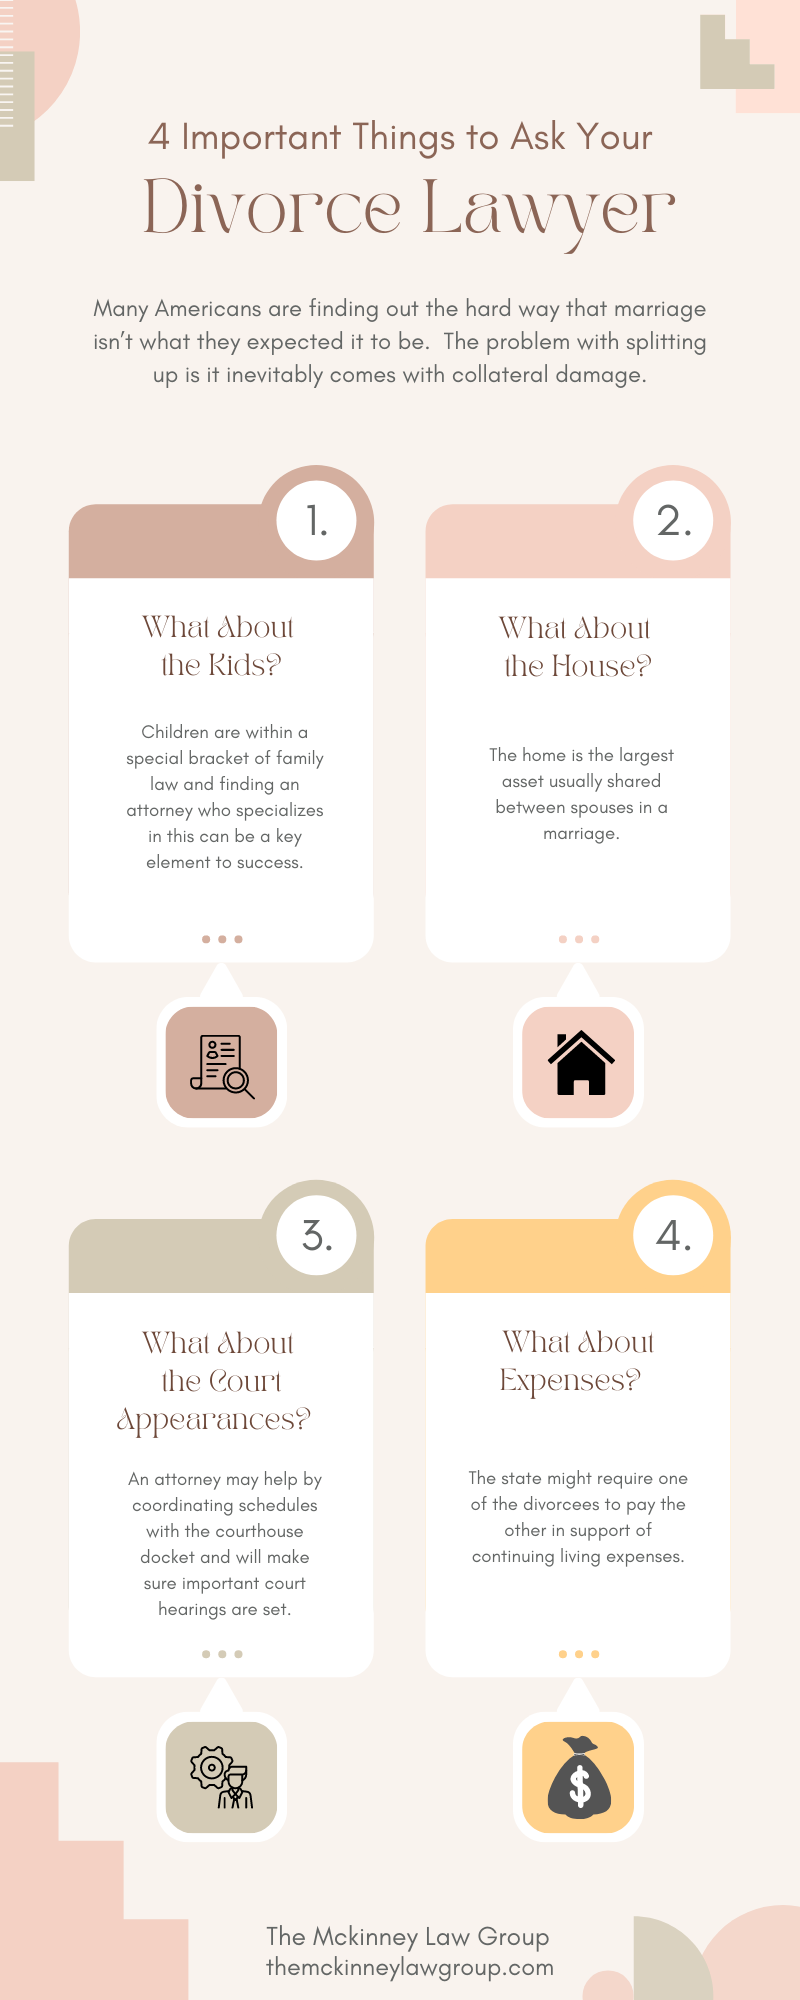 4 Important Things to Ask Your Divorce Lawyer Infographic